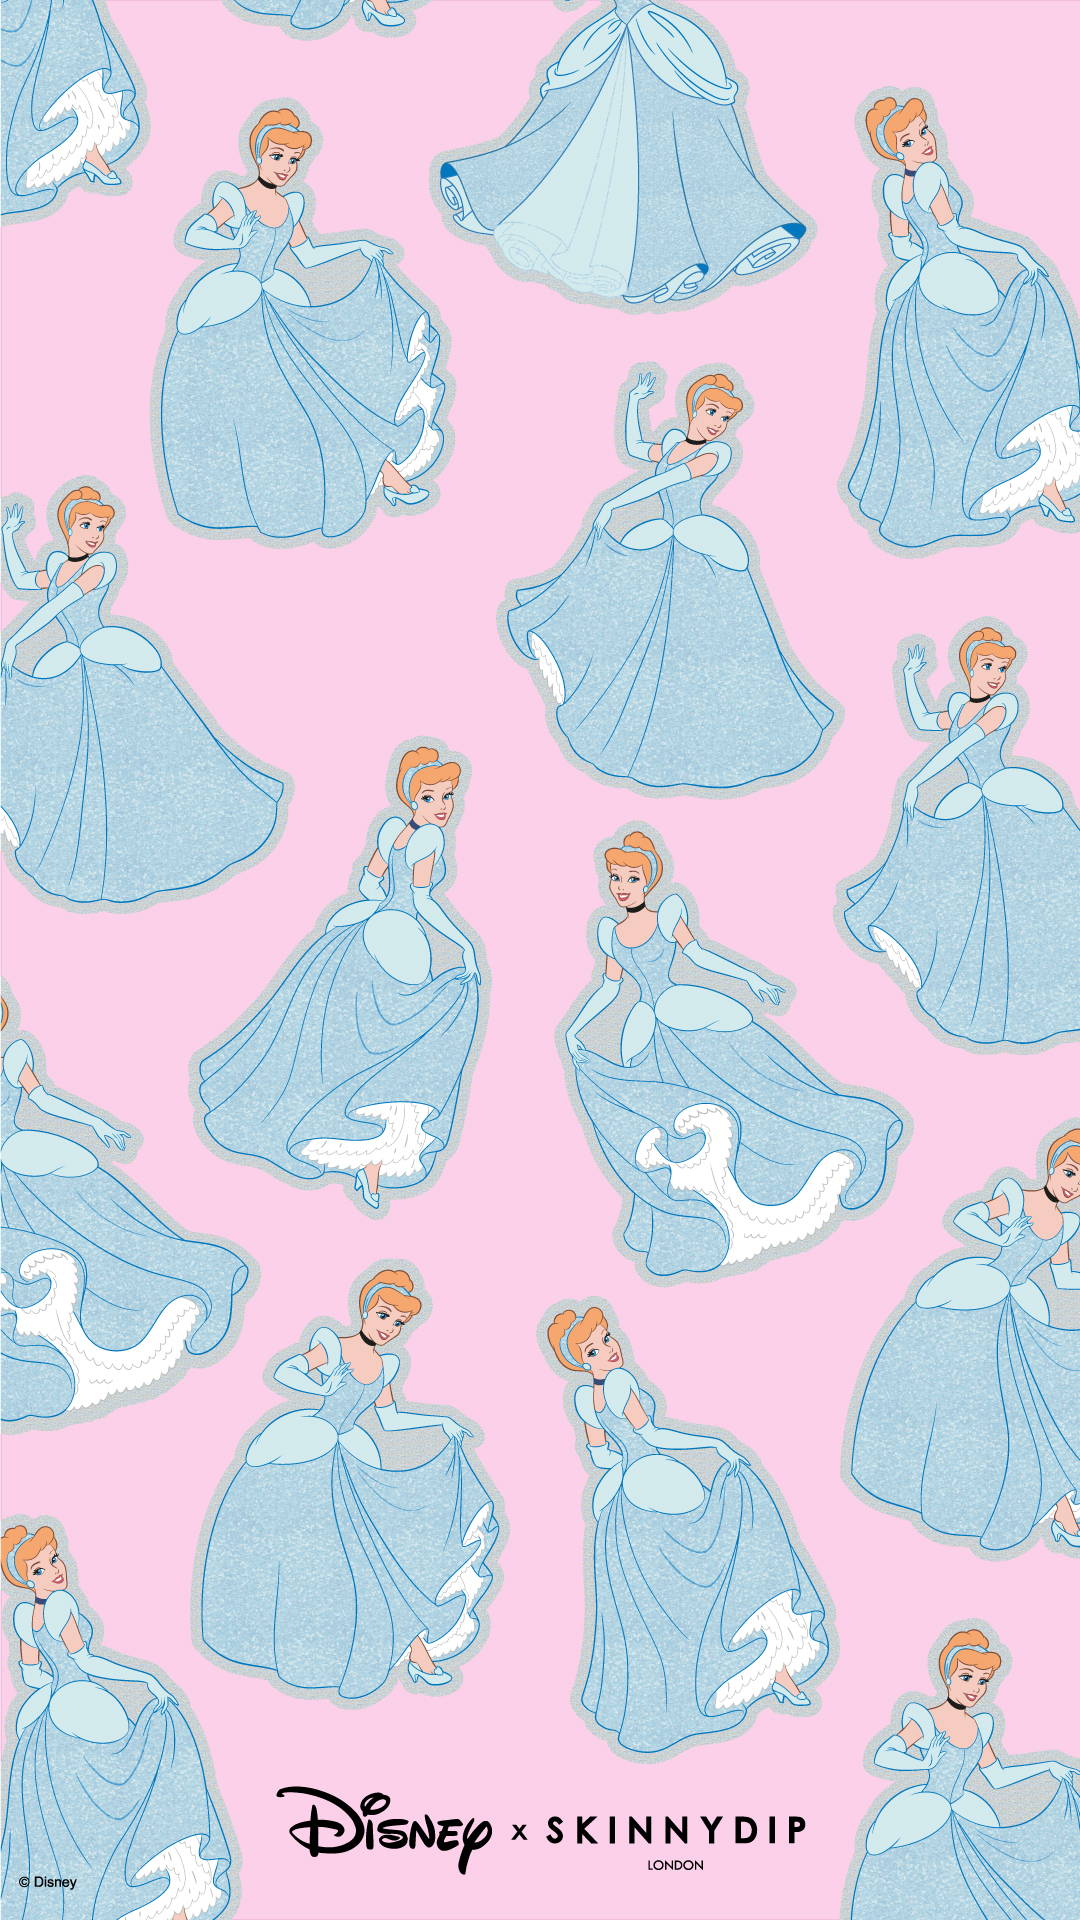 The Disney Princess Collection: Phone Wallpapers